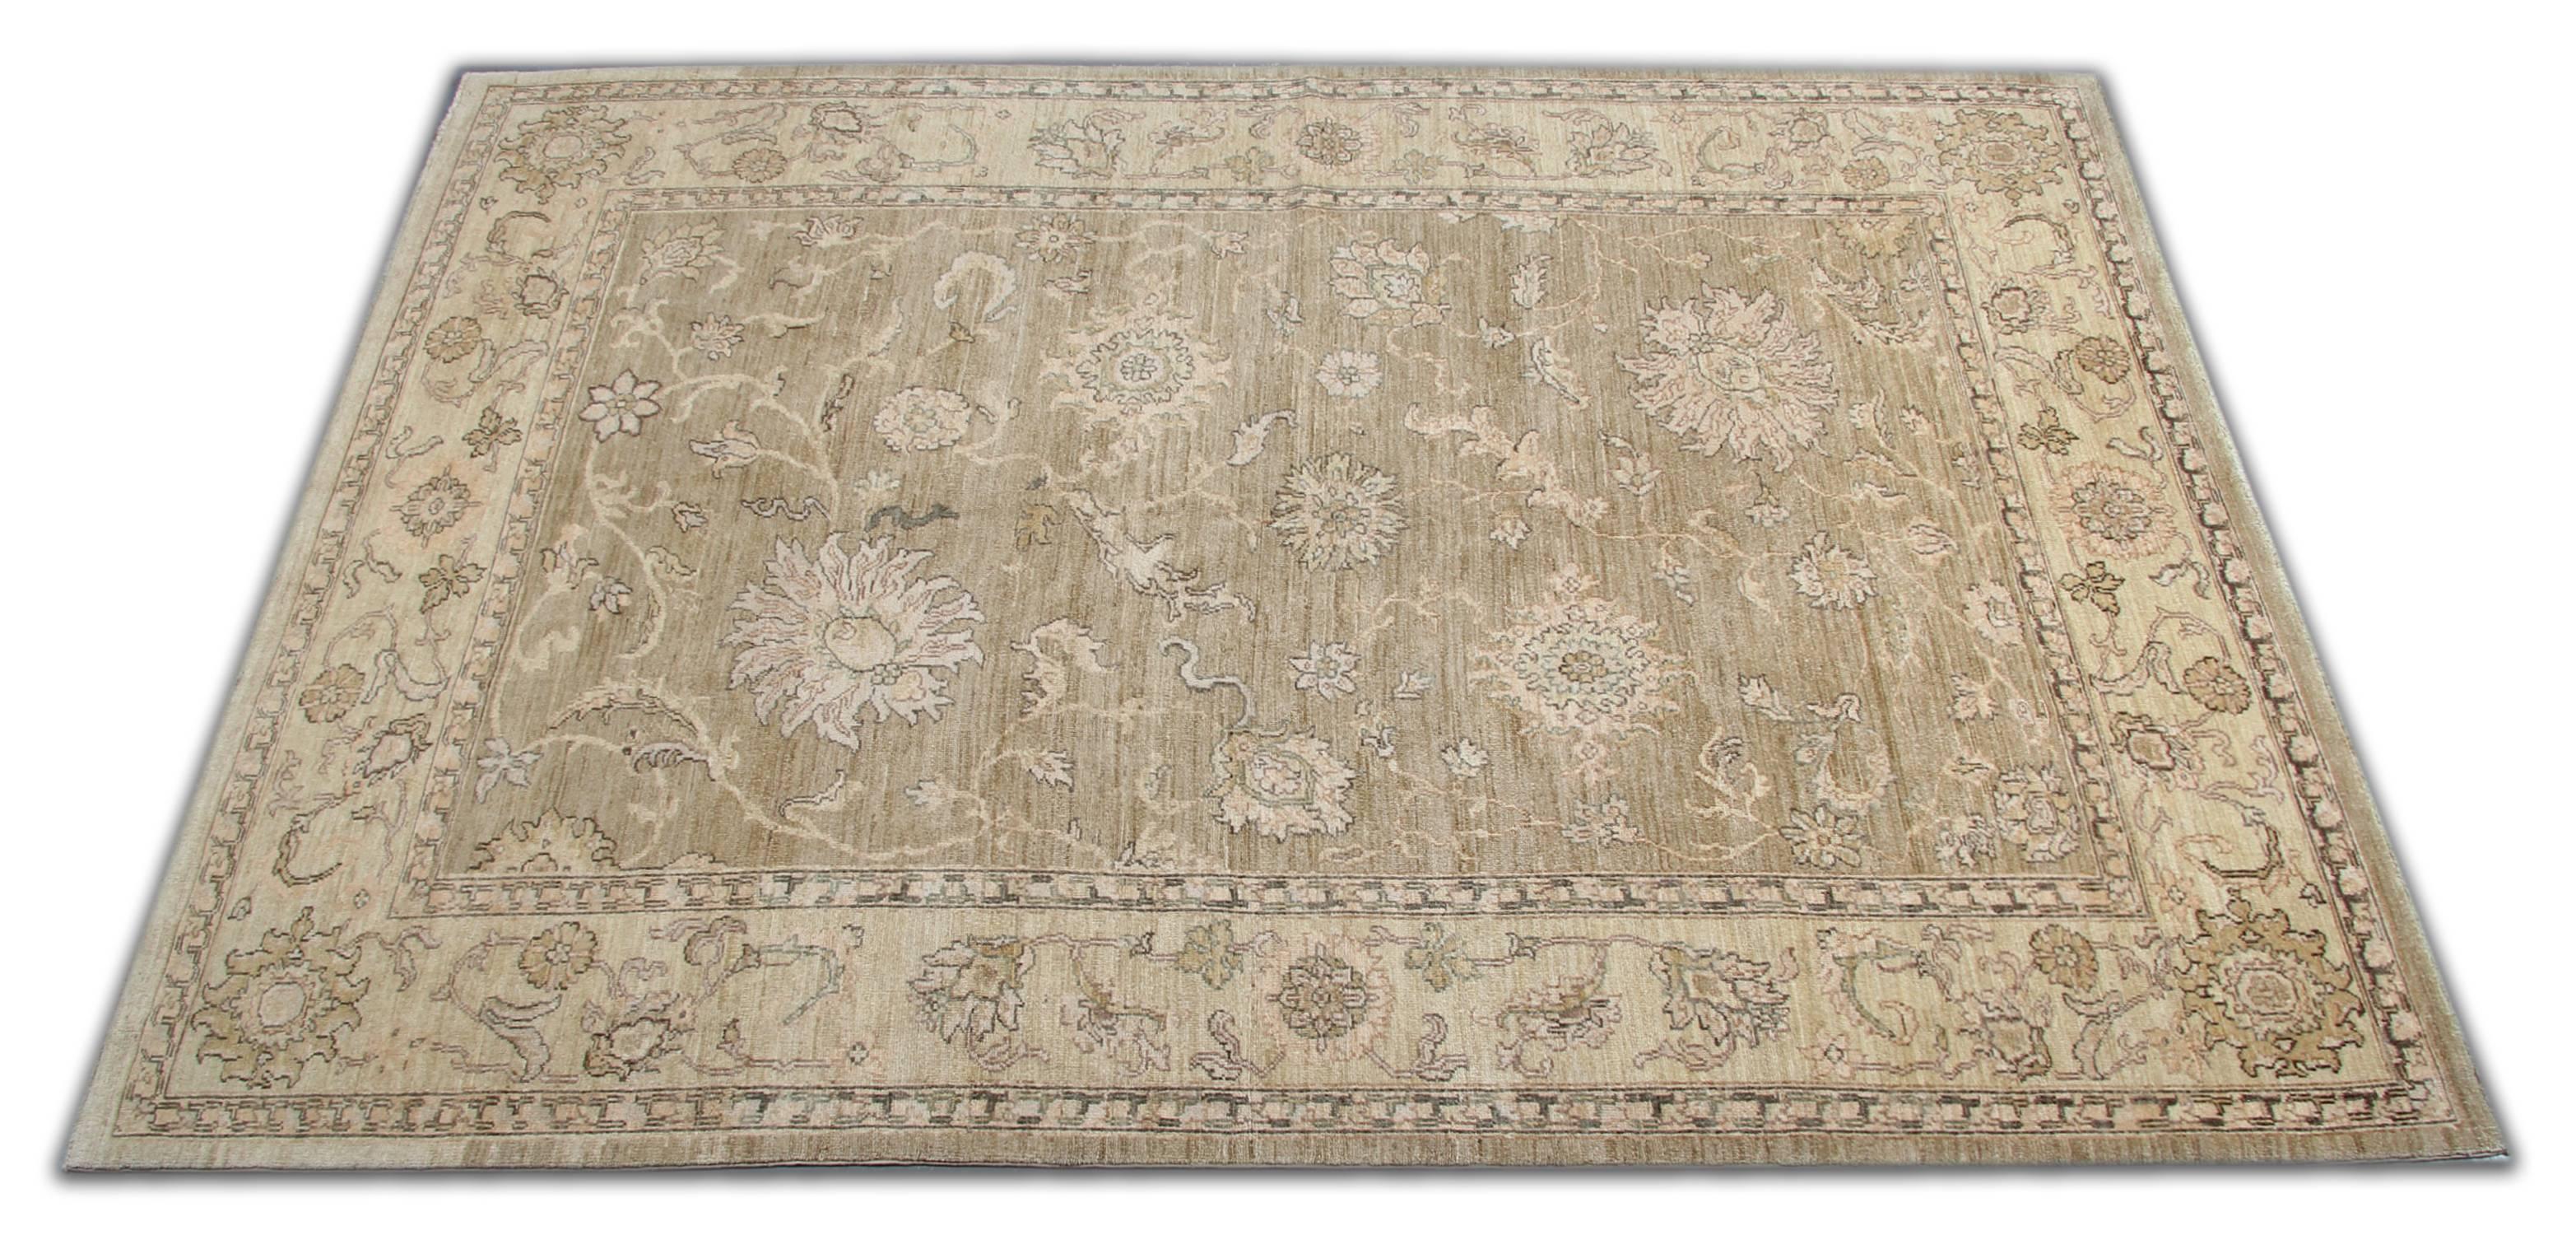 This rug is an example of handmade rugs in Afghanistan by skilled weavers. Handspun wool is used with natural dyes then the rug is professionally washed and finished. These traditional rugs are kind of our luxury rugs made of own looms by our master